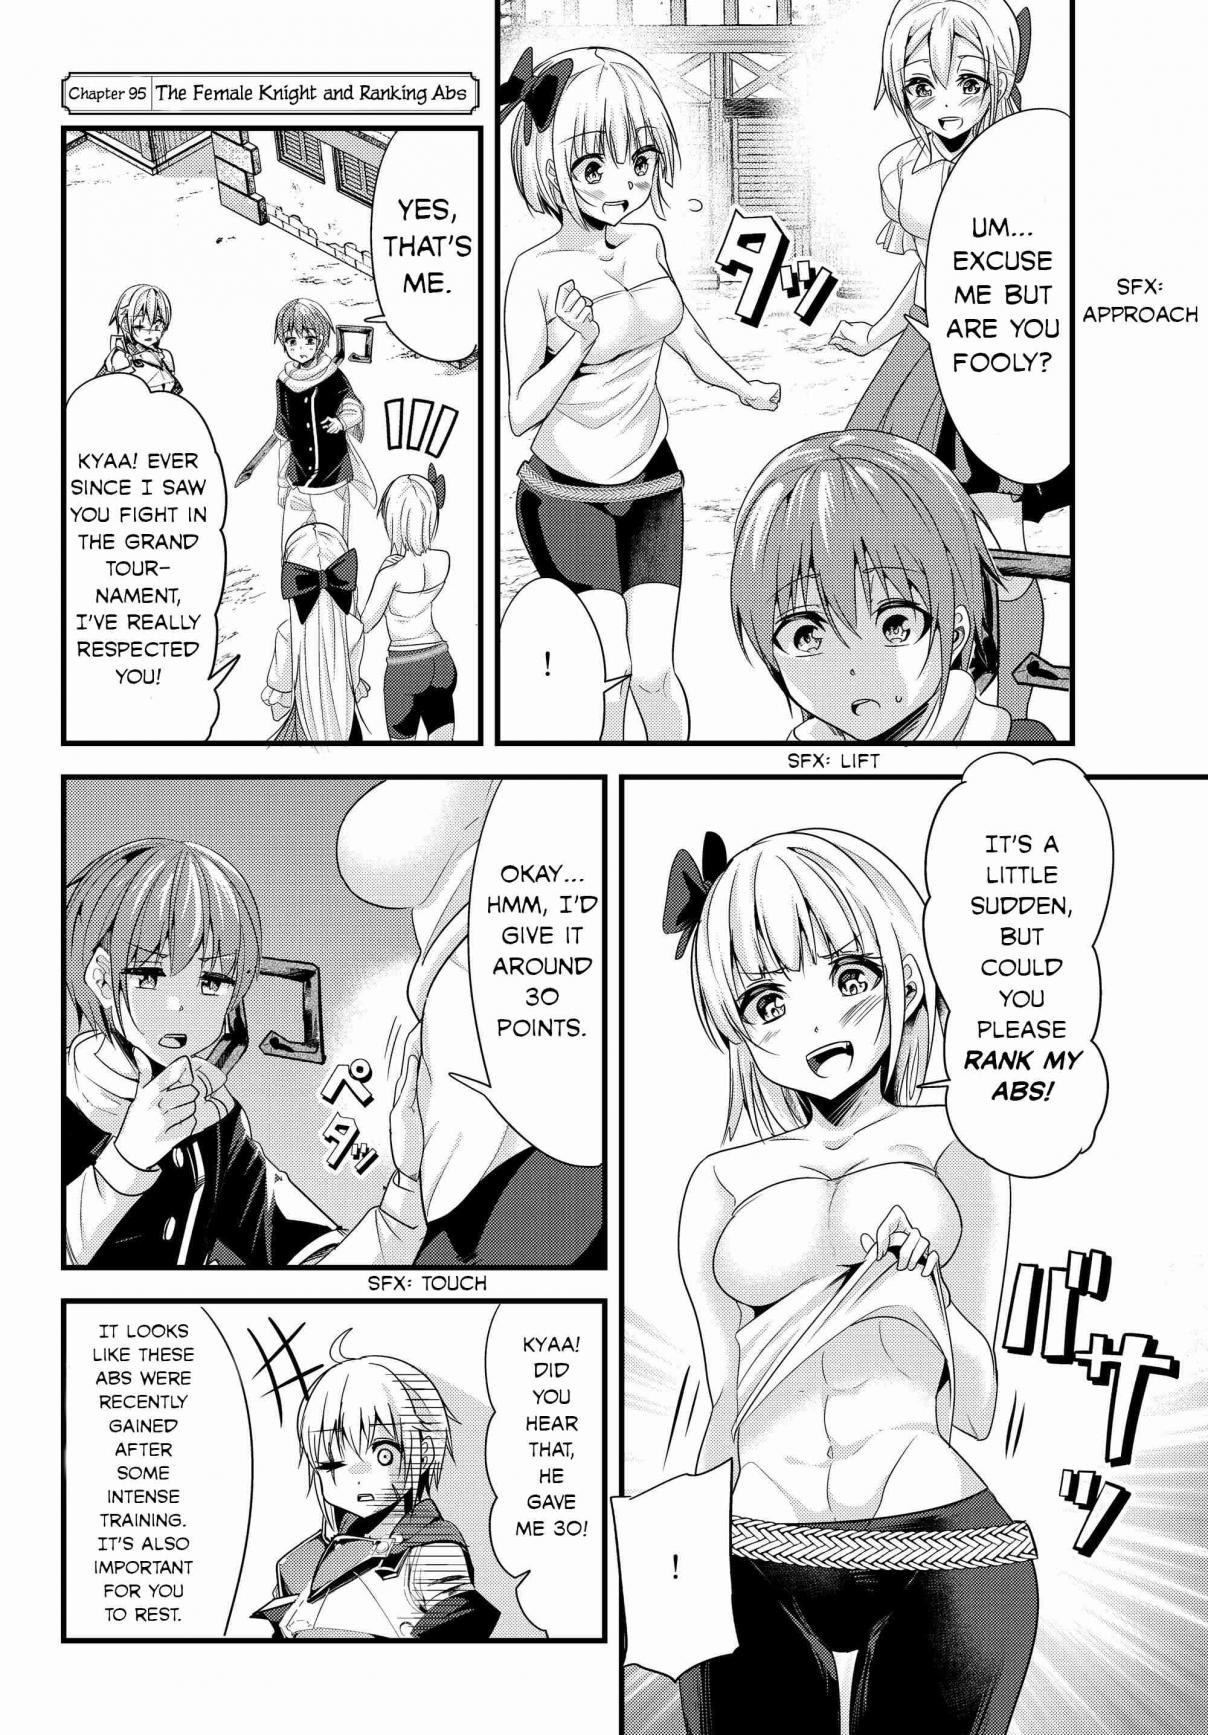 A Story About Treating a Female Knight, Who Has Never Been Treated as a Woman, as a Woman Ch. 95 The Female Knight and Ranking Abs